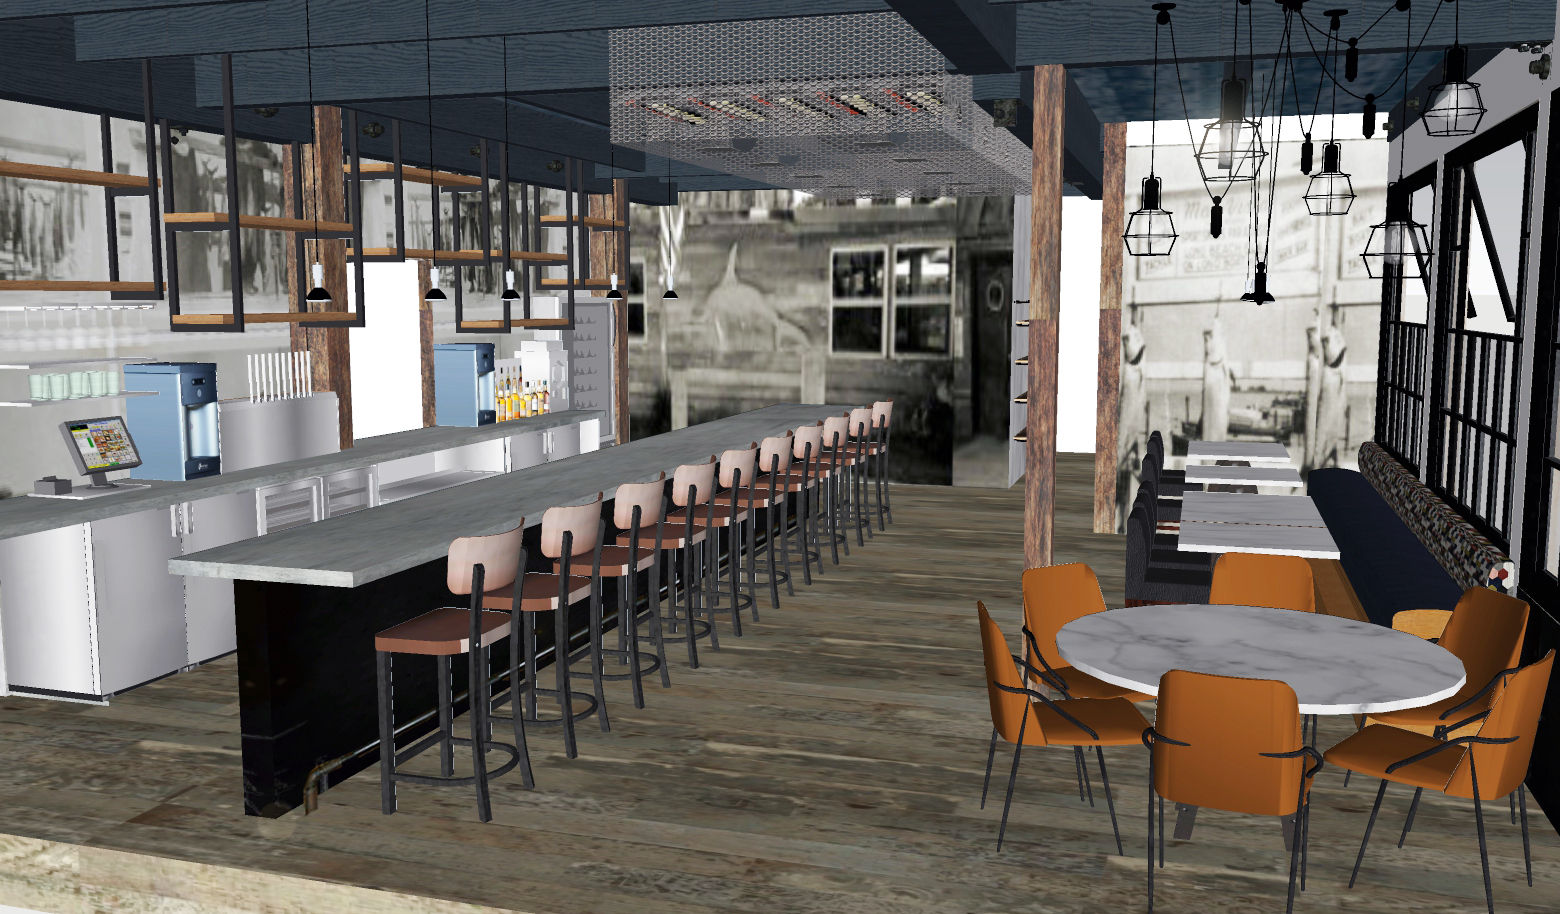 Ed Chiles is hoping the renovation of Mar Vista Dockside Restaurant & Pub is his last major redevelopment project.